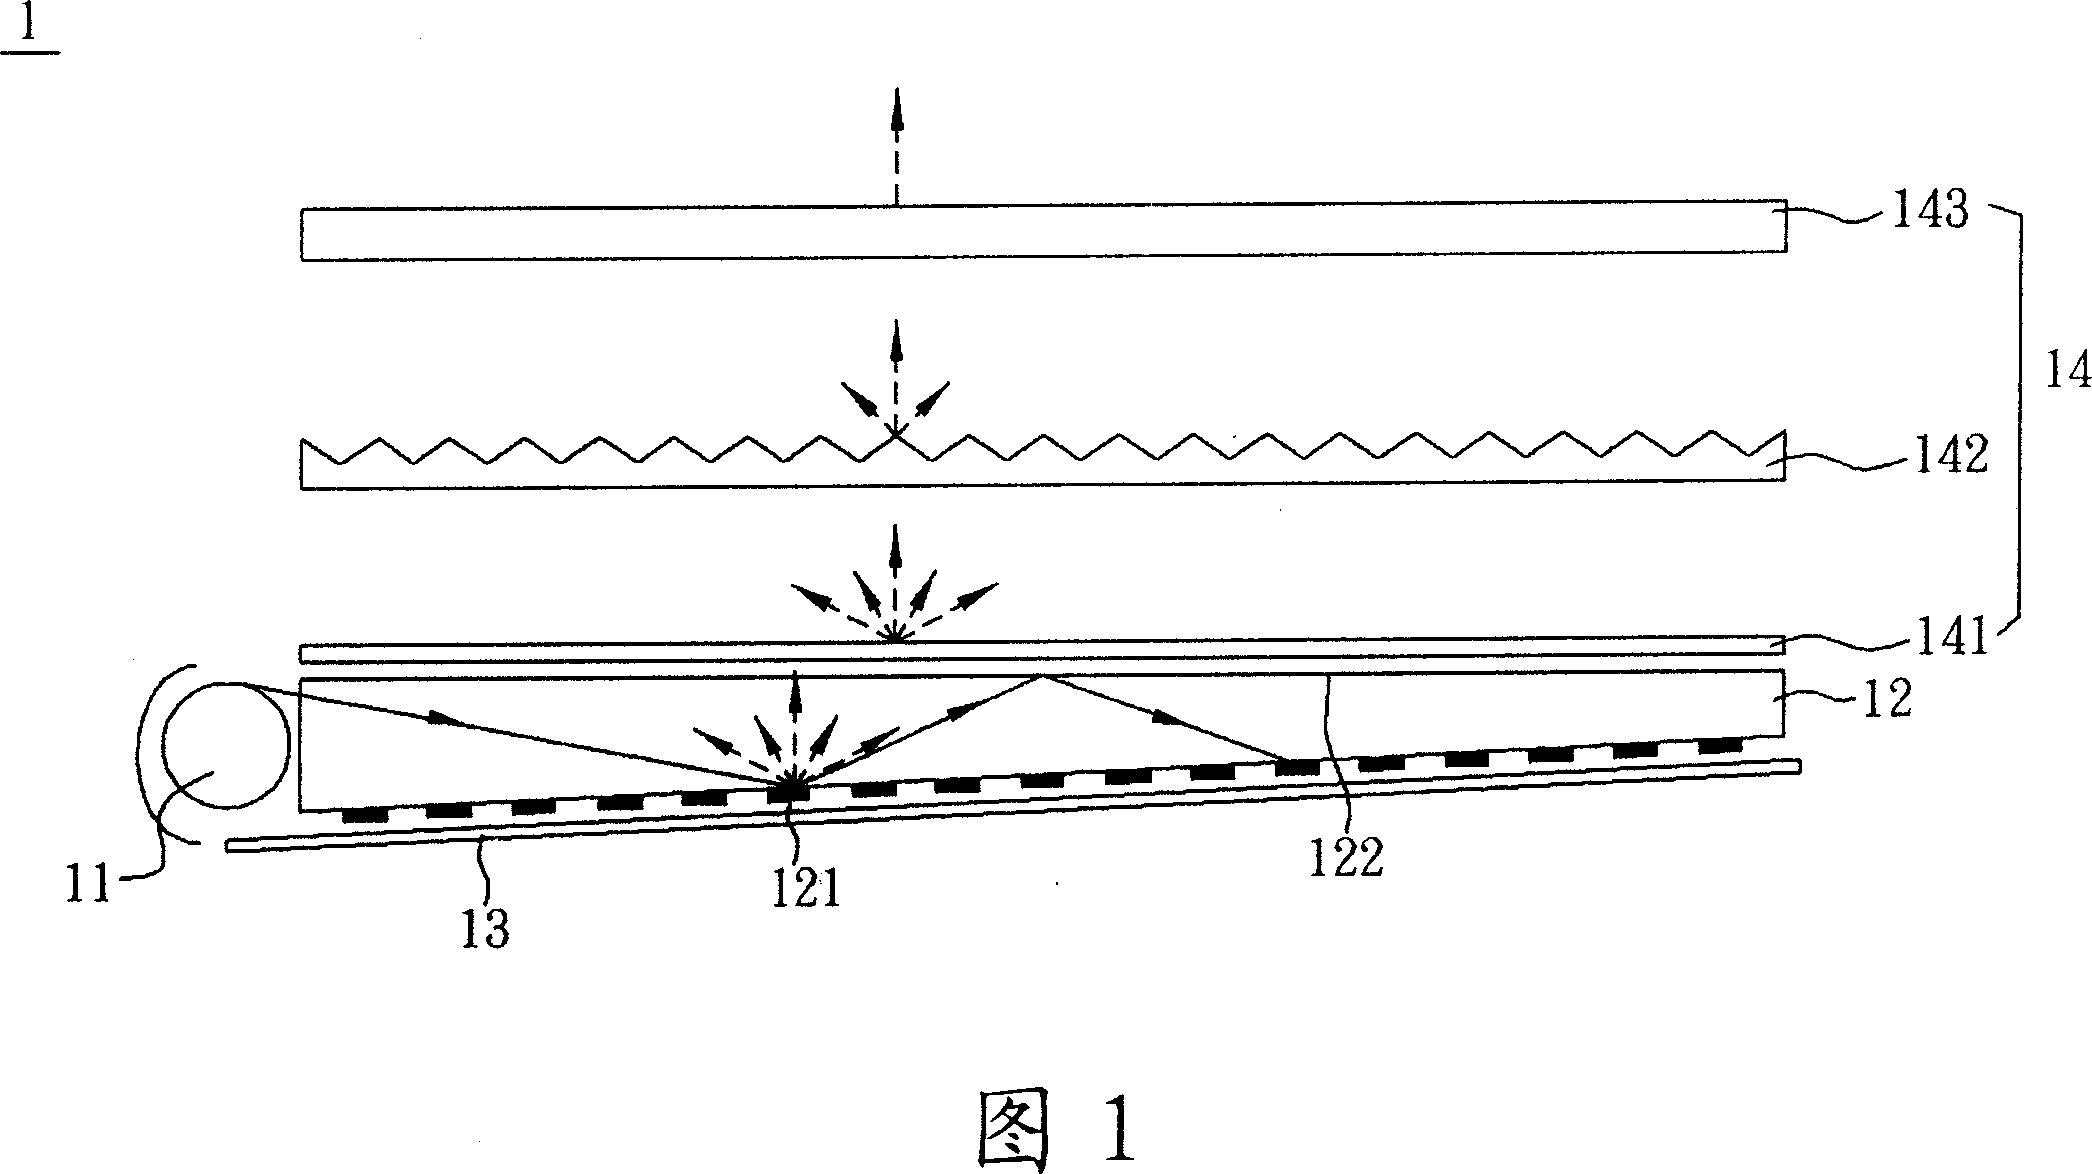 Liquid crystal display device and its backlight module